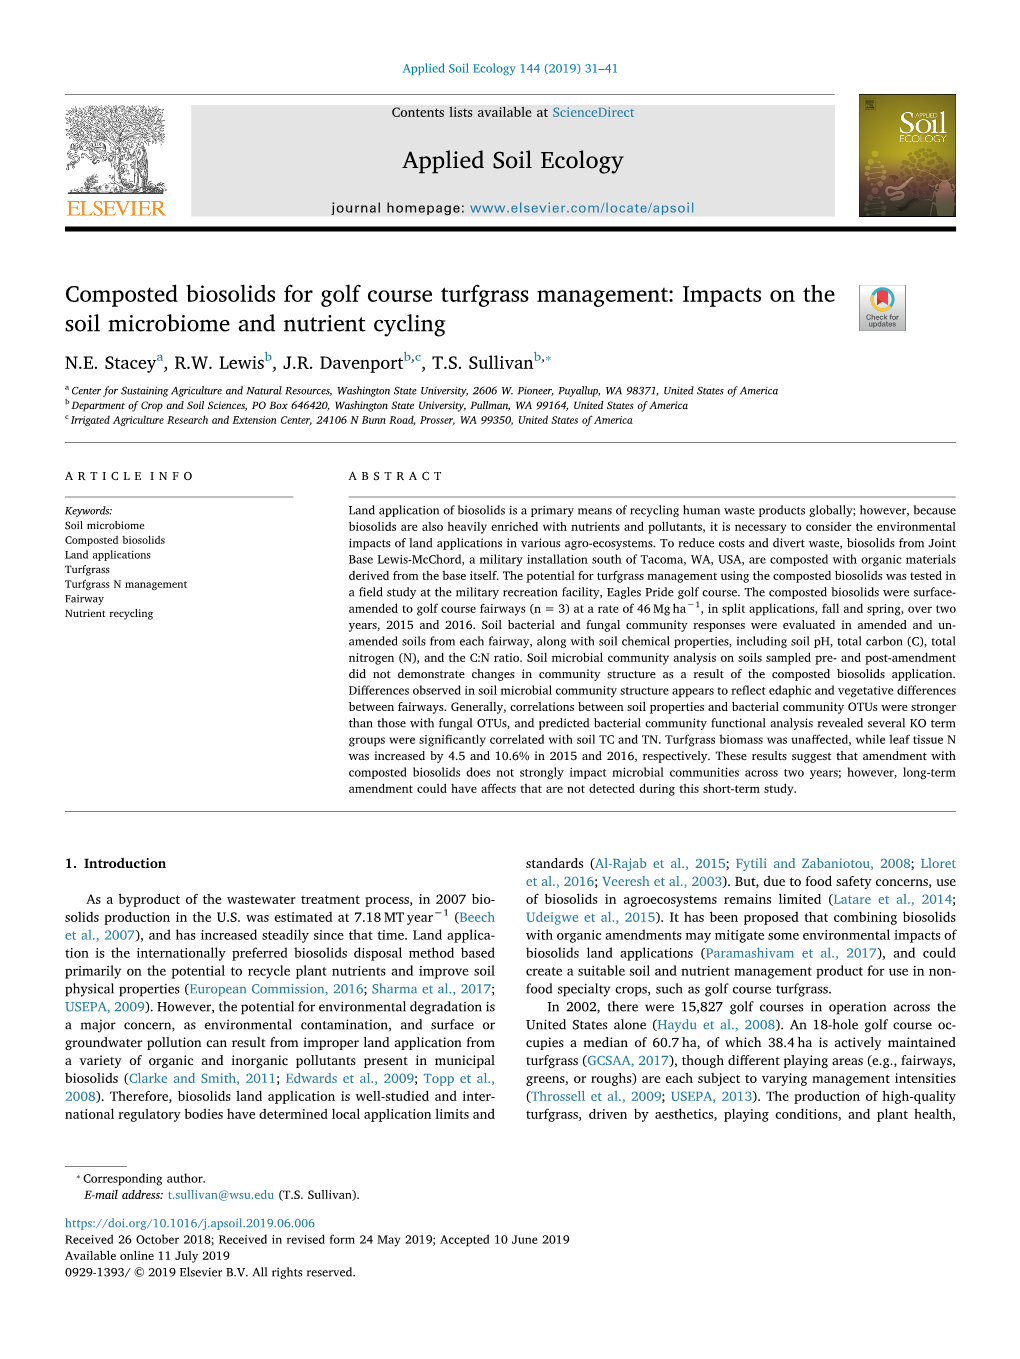 Composted Biosolids for Golf Course Turfgrass Management Impacts On